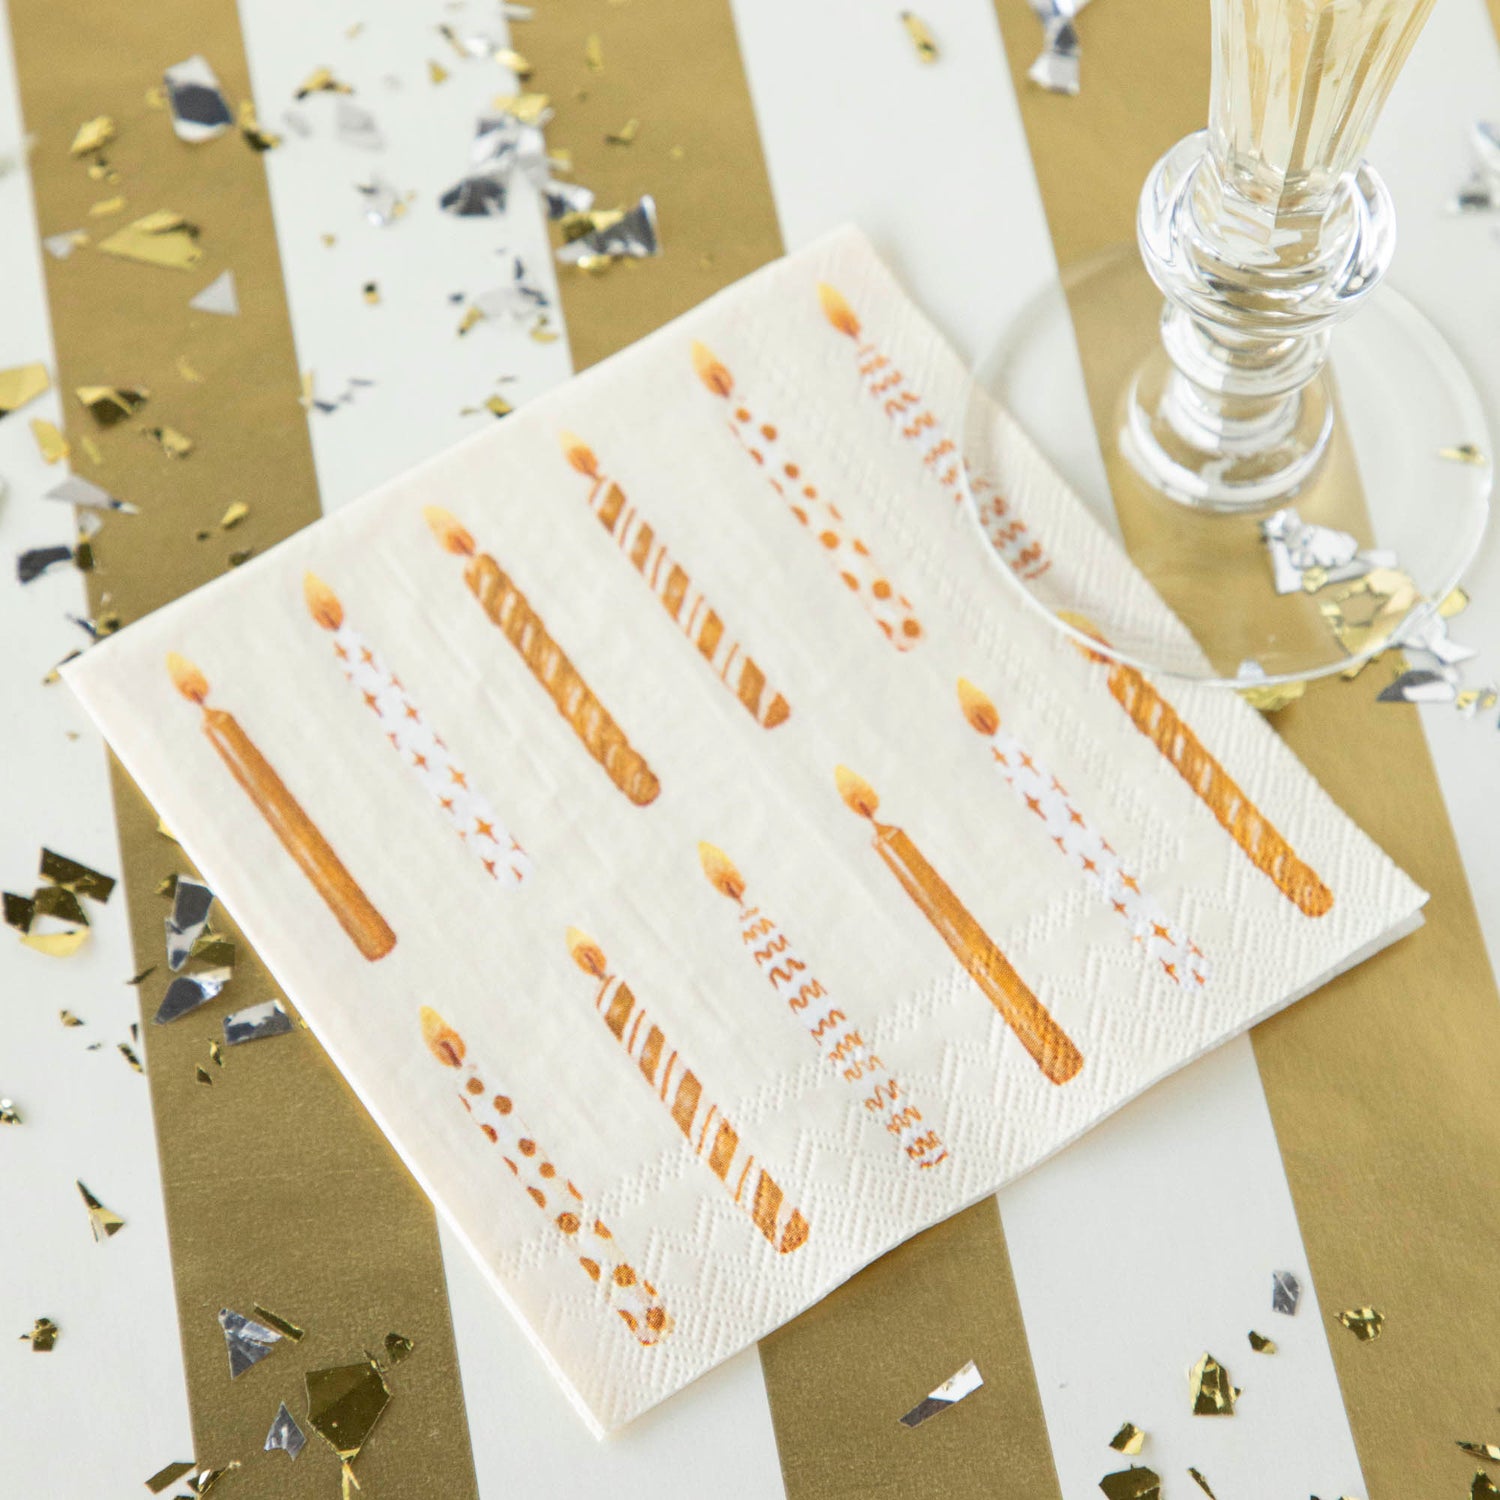 A Gold Candles Cocktail Napkin under a stemmed glass on a festive gold and white table.